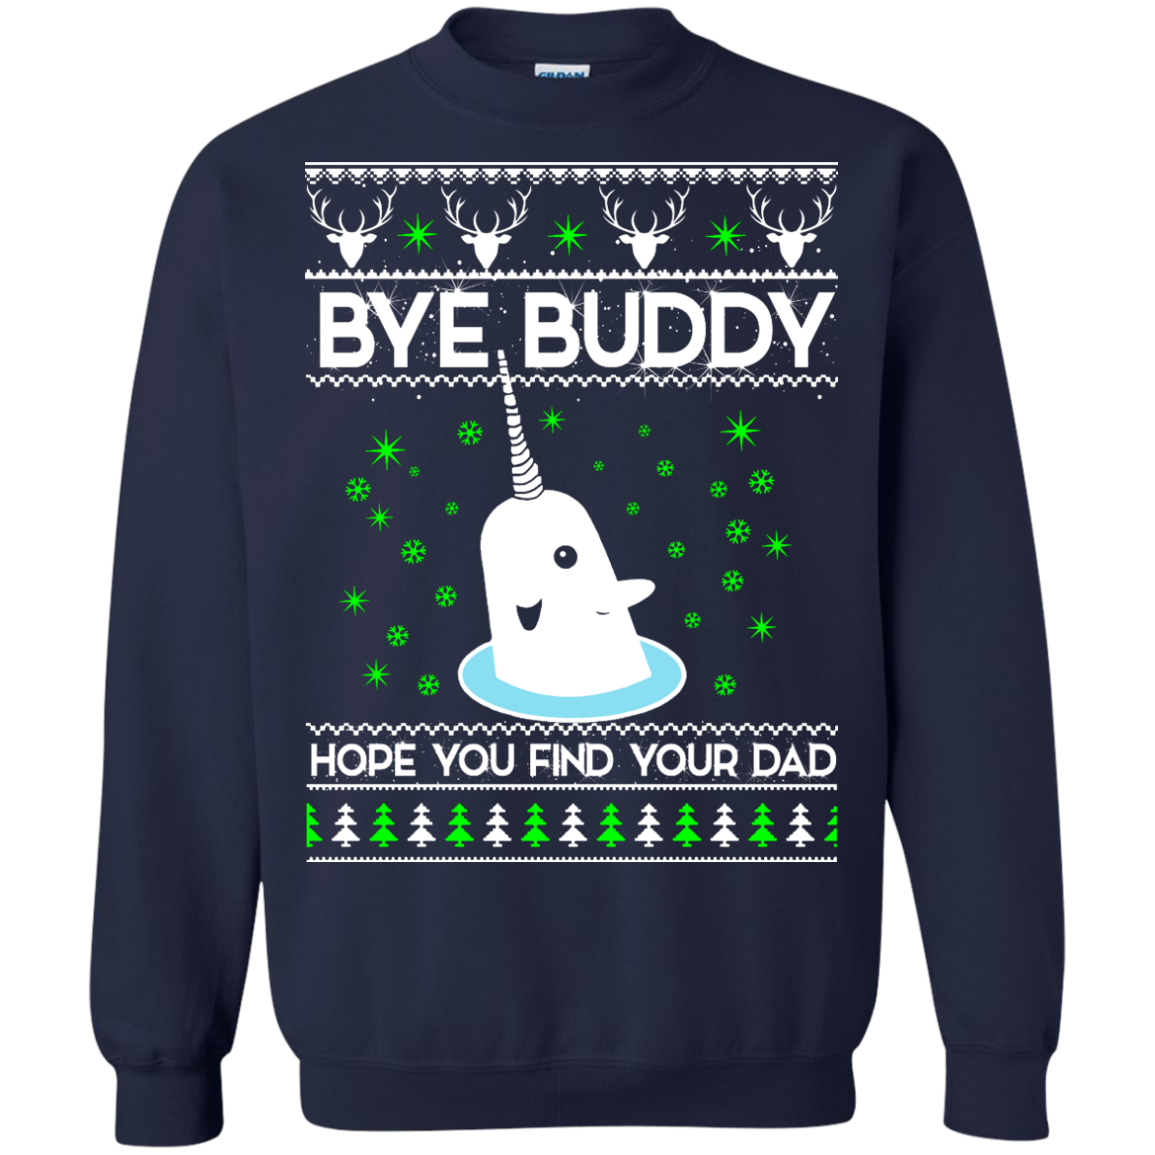 Bye Buddy Hope You Find Your Dad Sweater